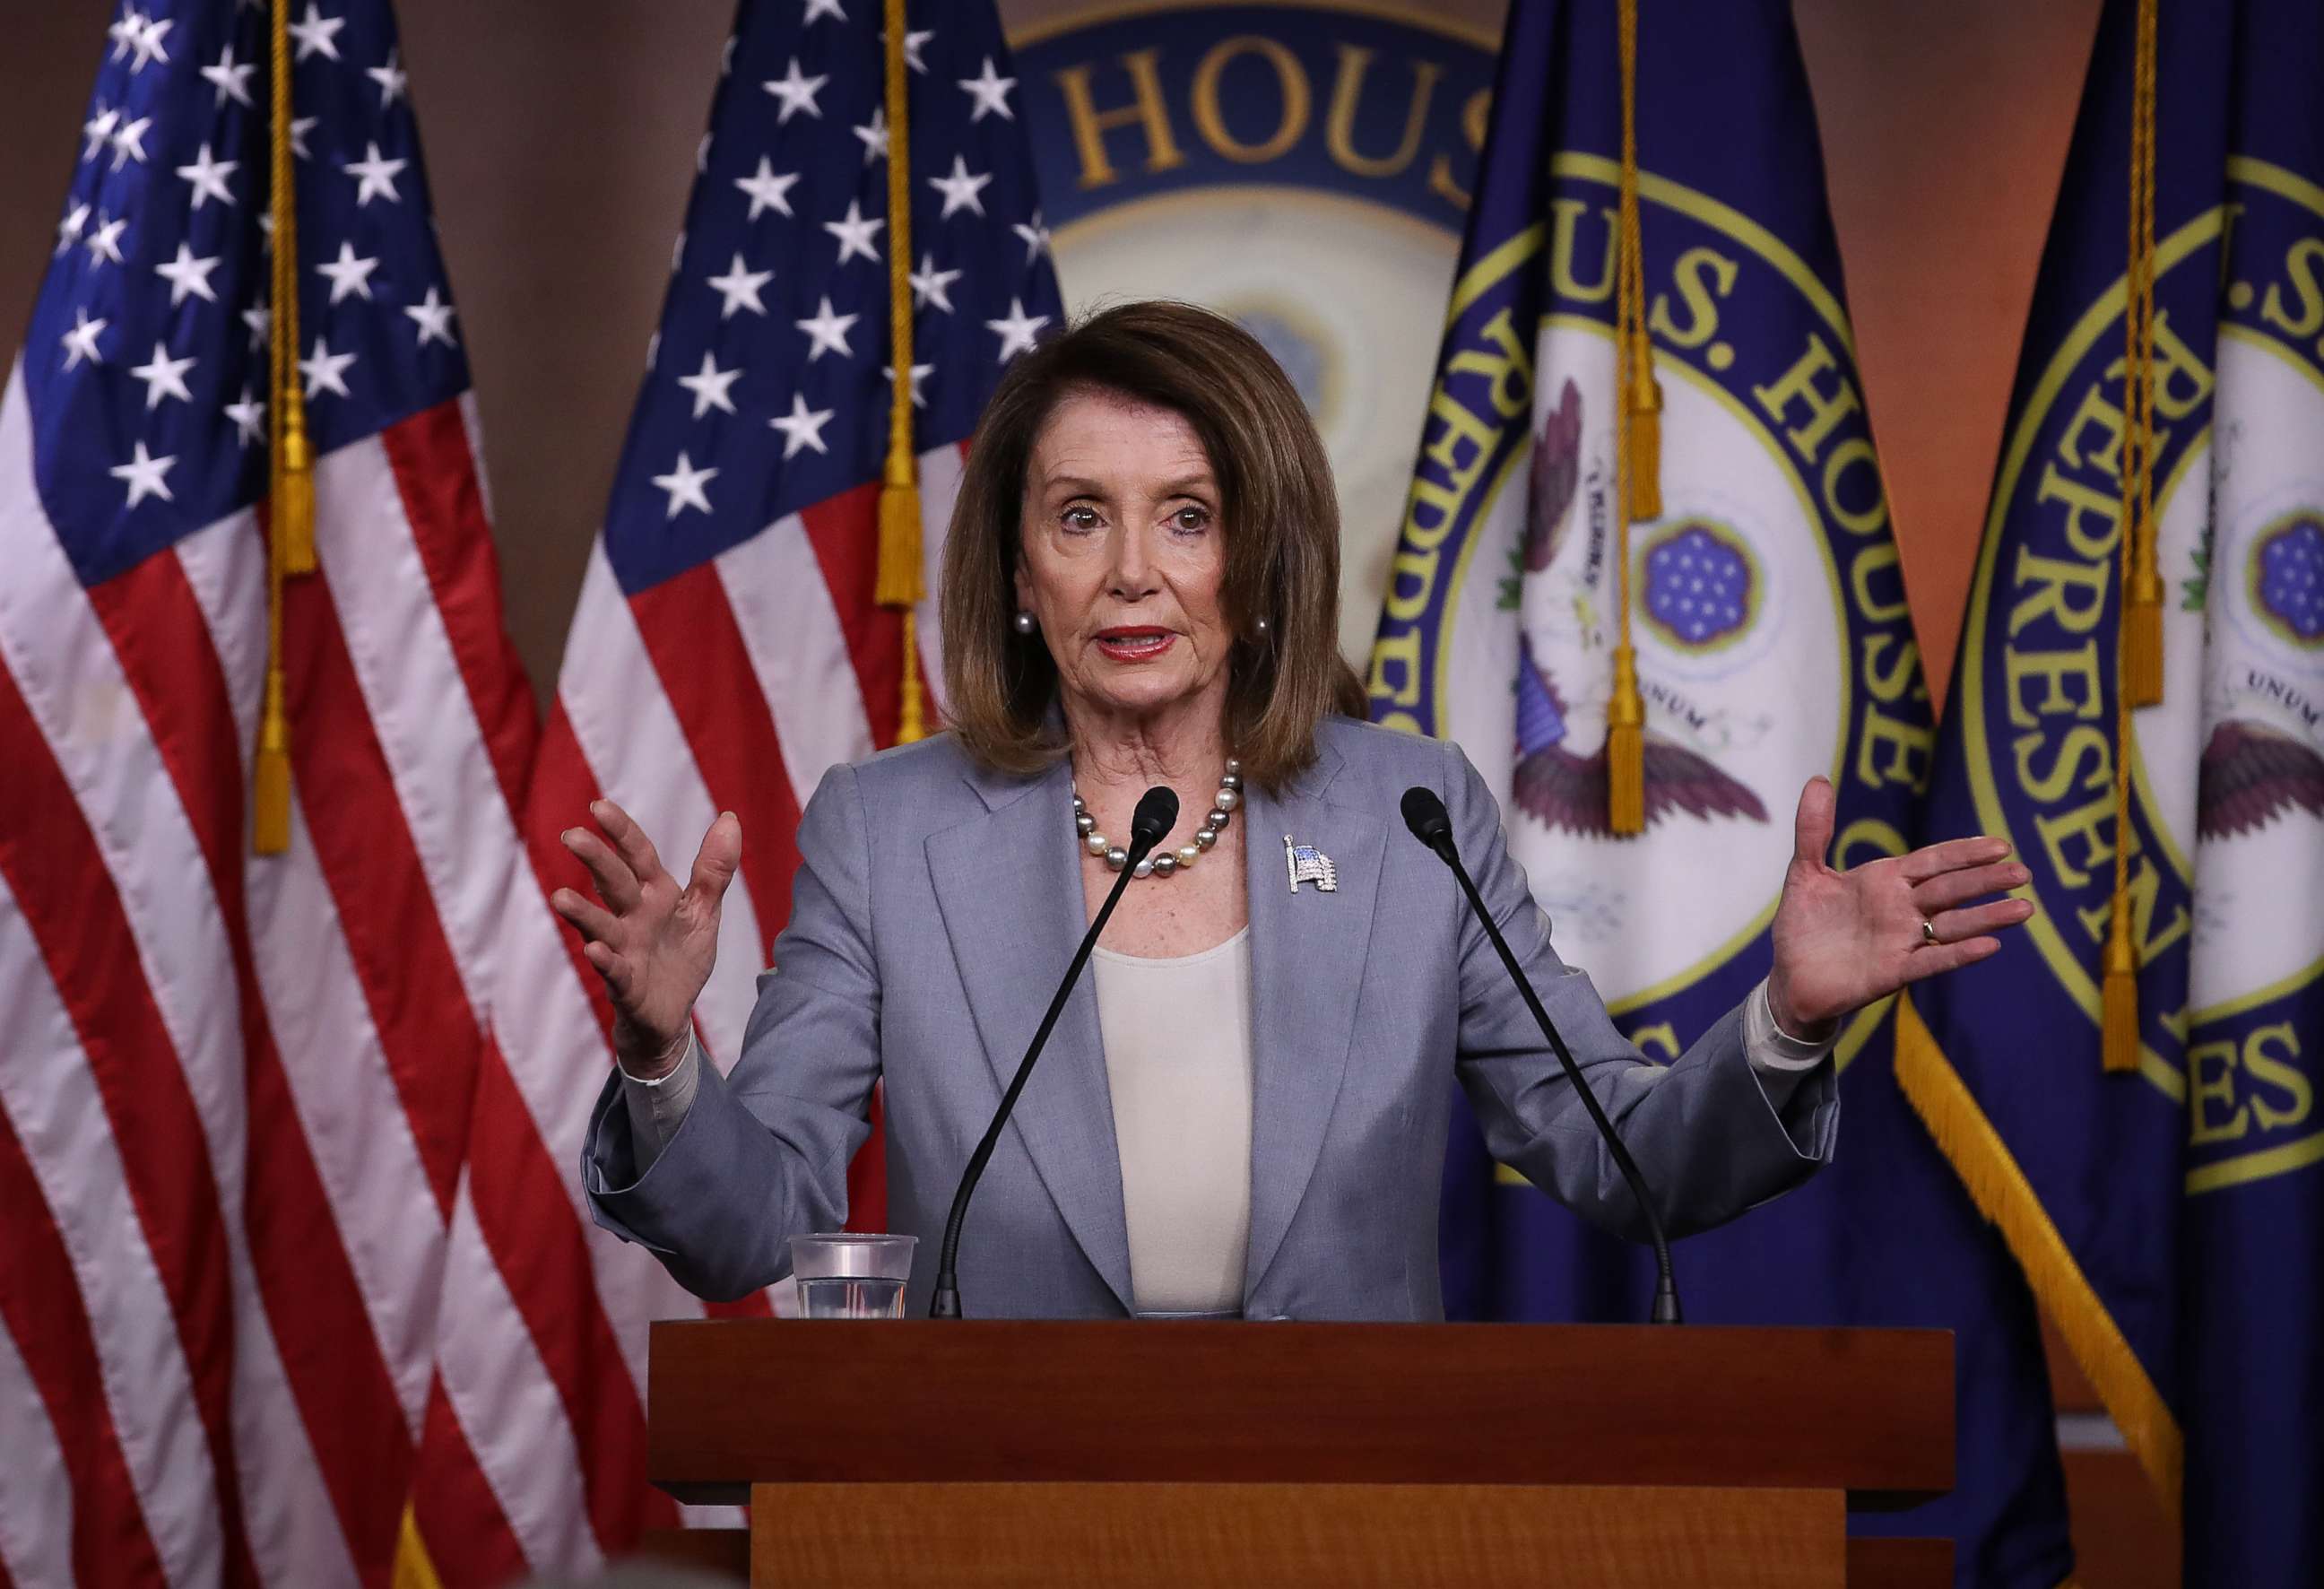 PHOTO: Speaker of the House Nancy Pelosi (D-CA) answers questions during a press conference at the Capitol, May 9, 2019.